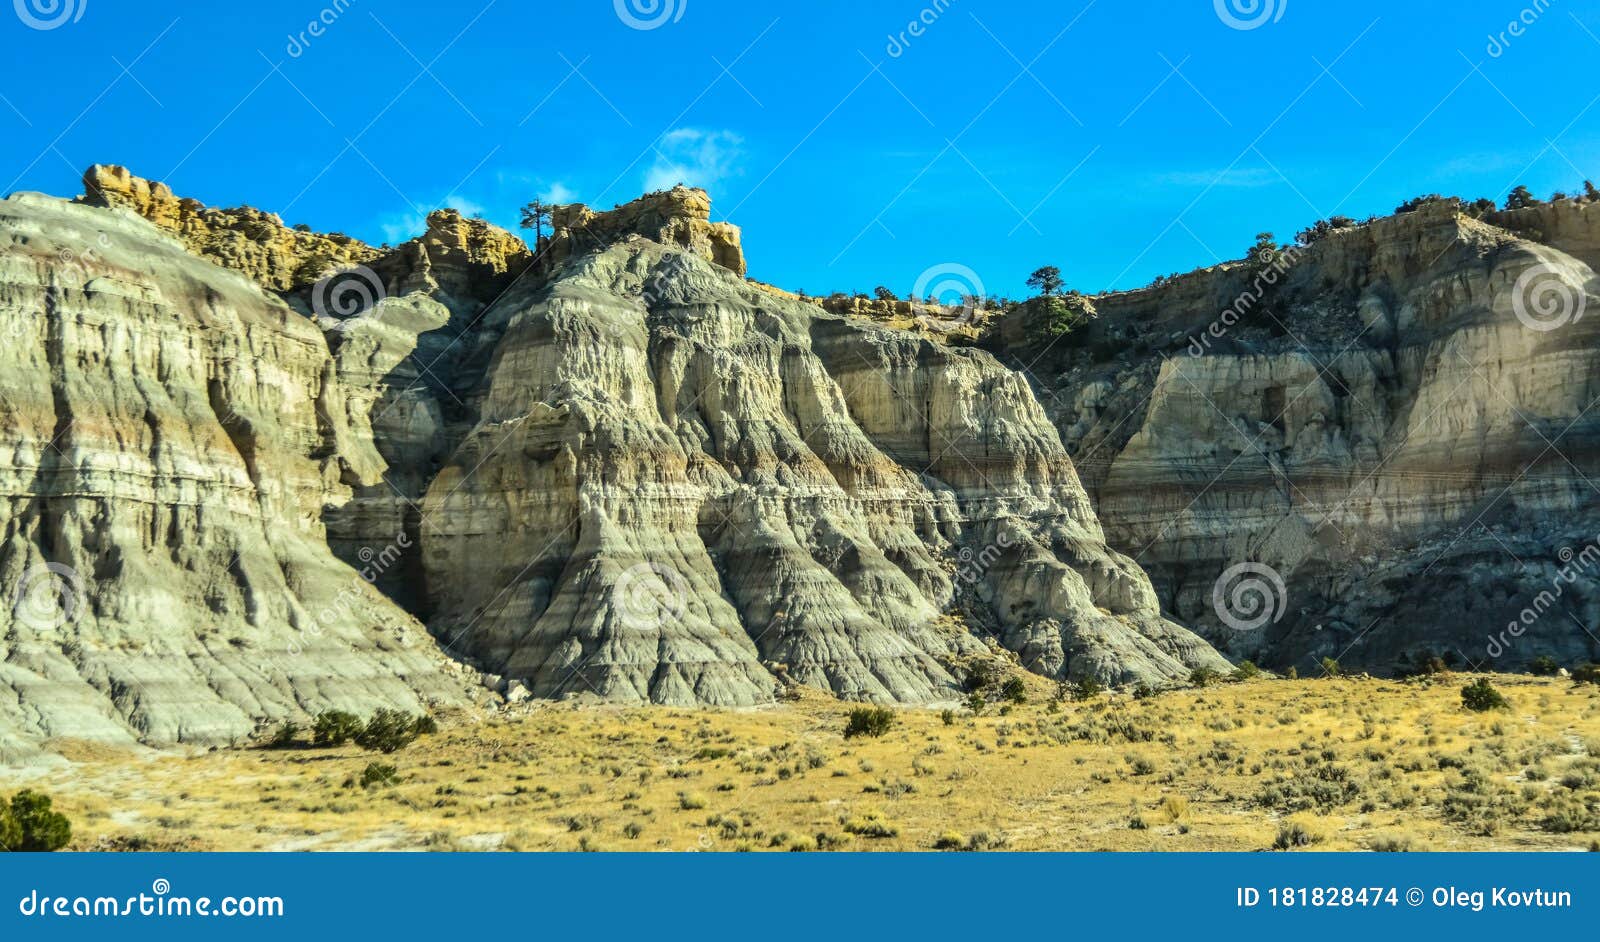 natural landscape, erosive rock formations in new mexico